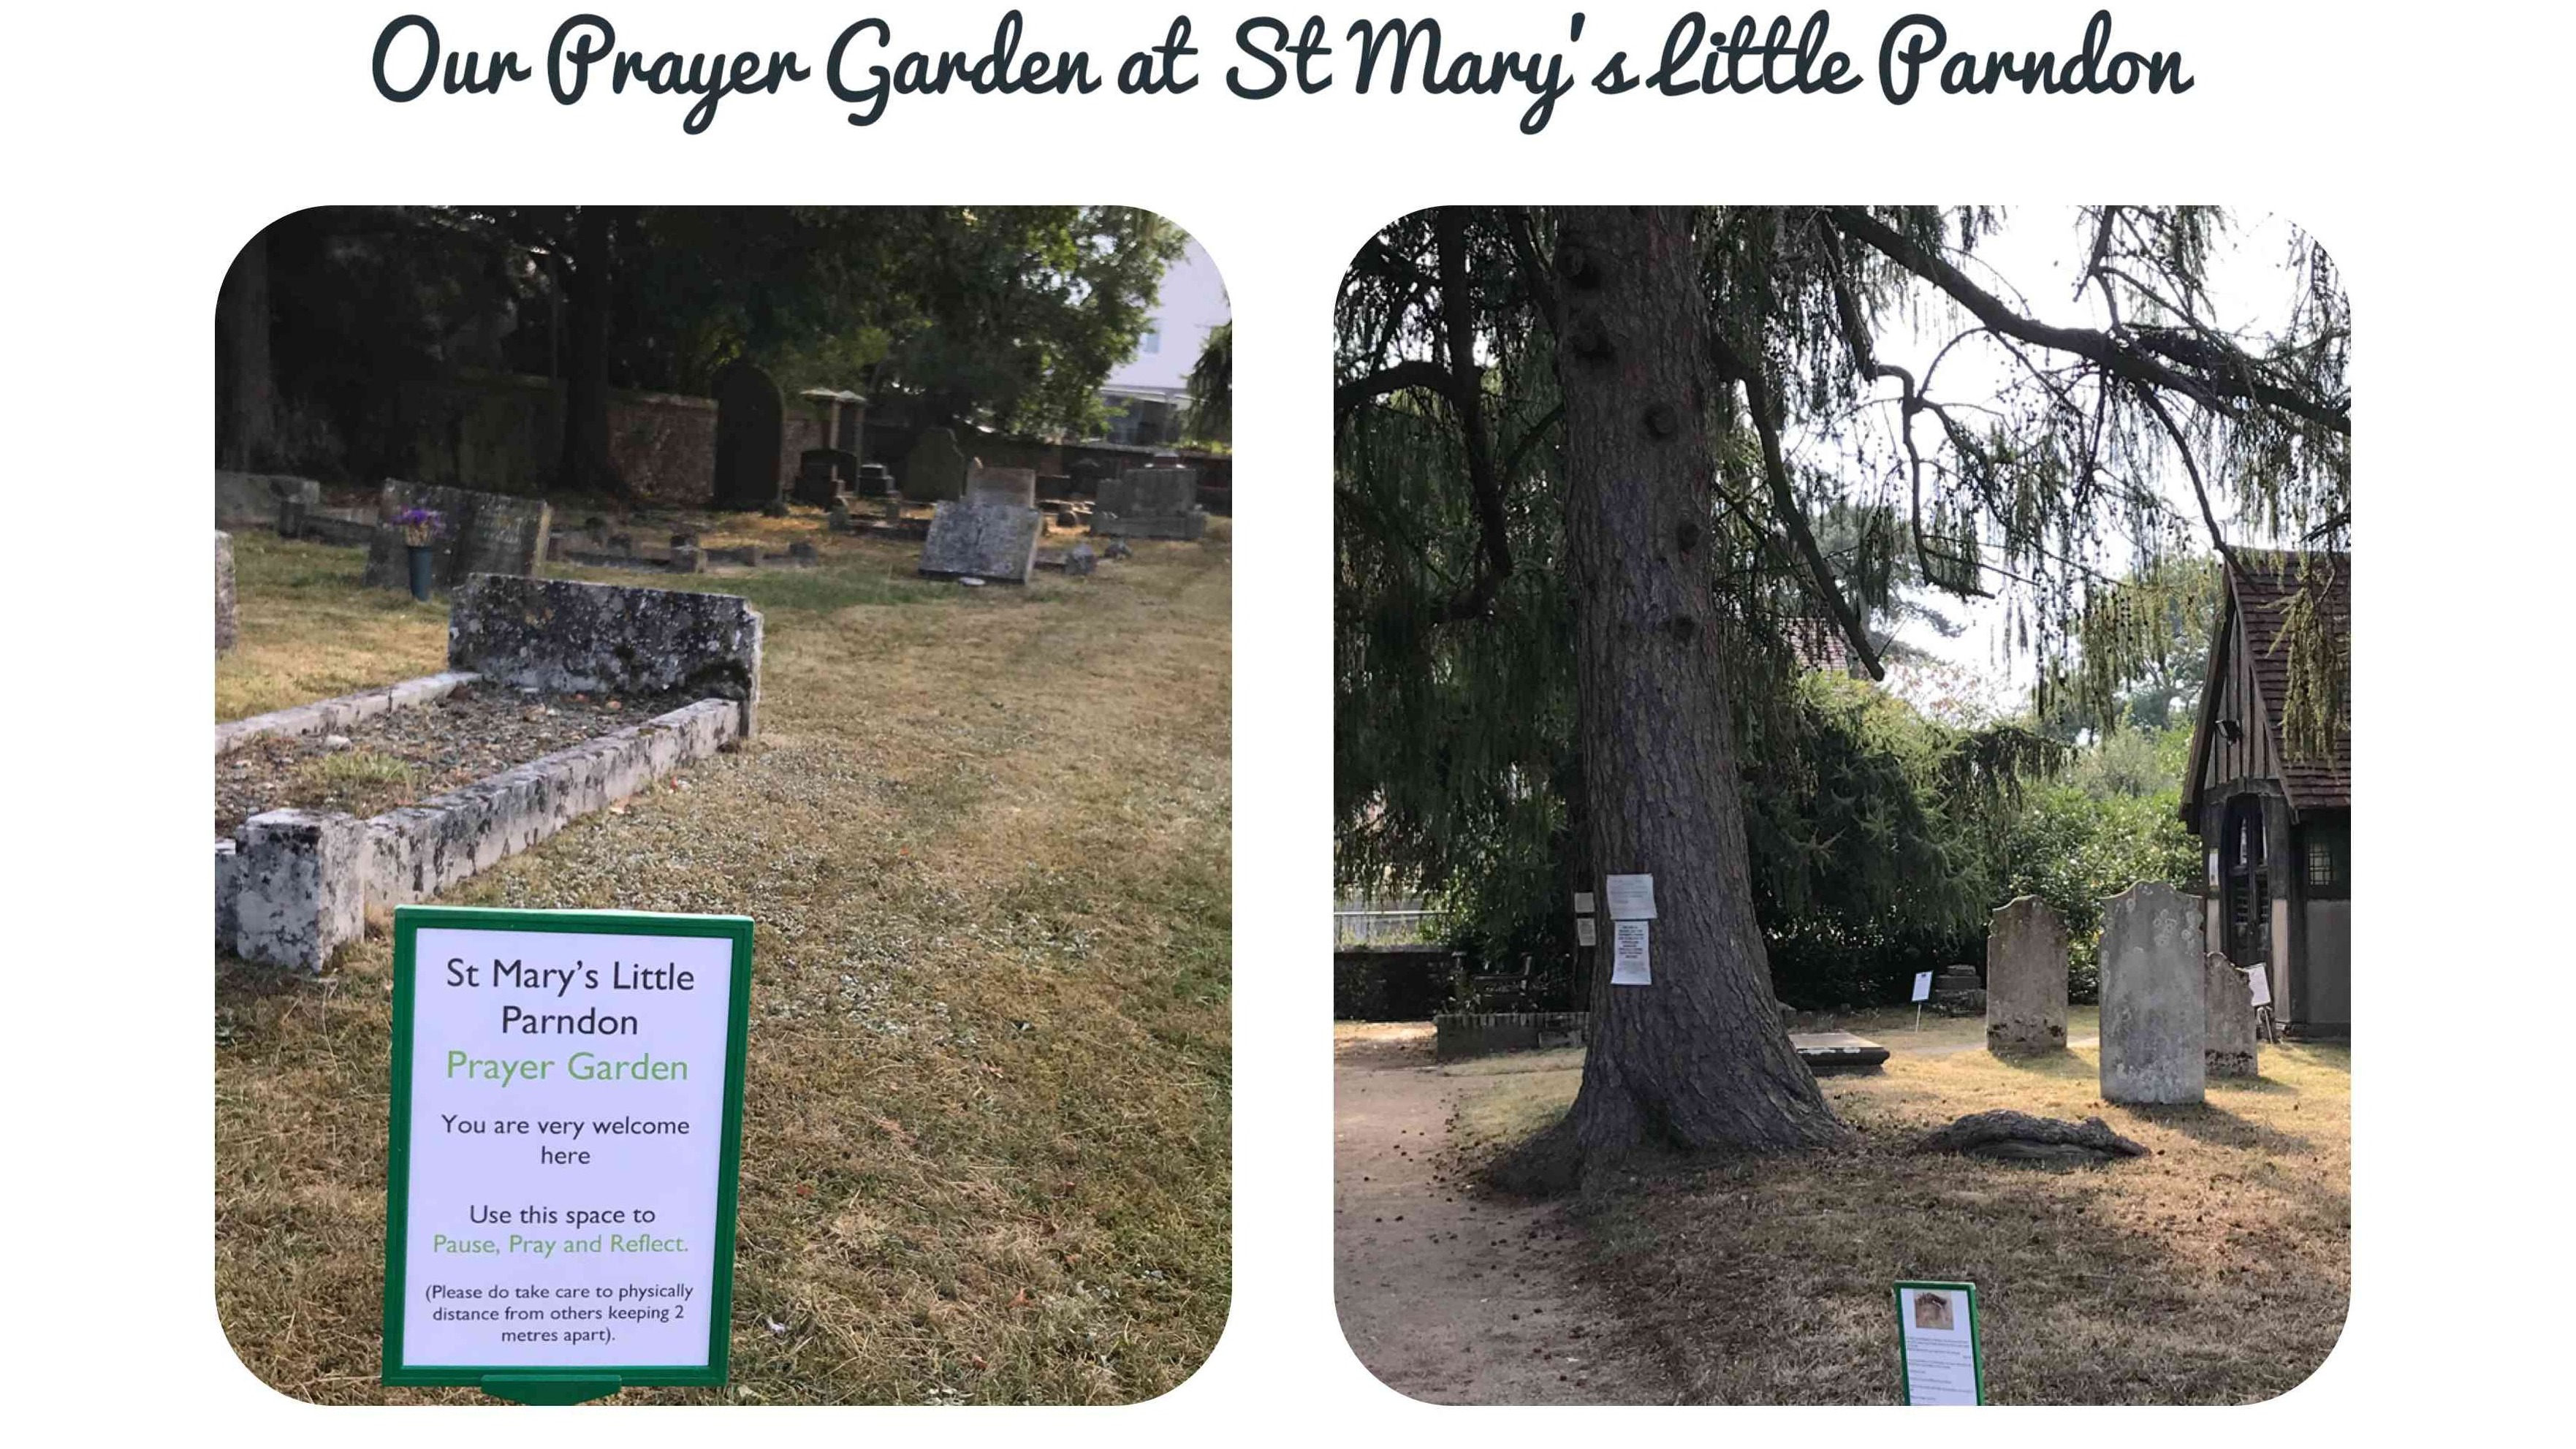 A Prayer garden can help your prayer life when you struggle in prayer, or at any other time.